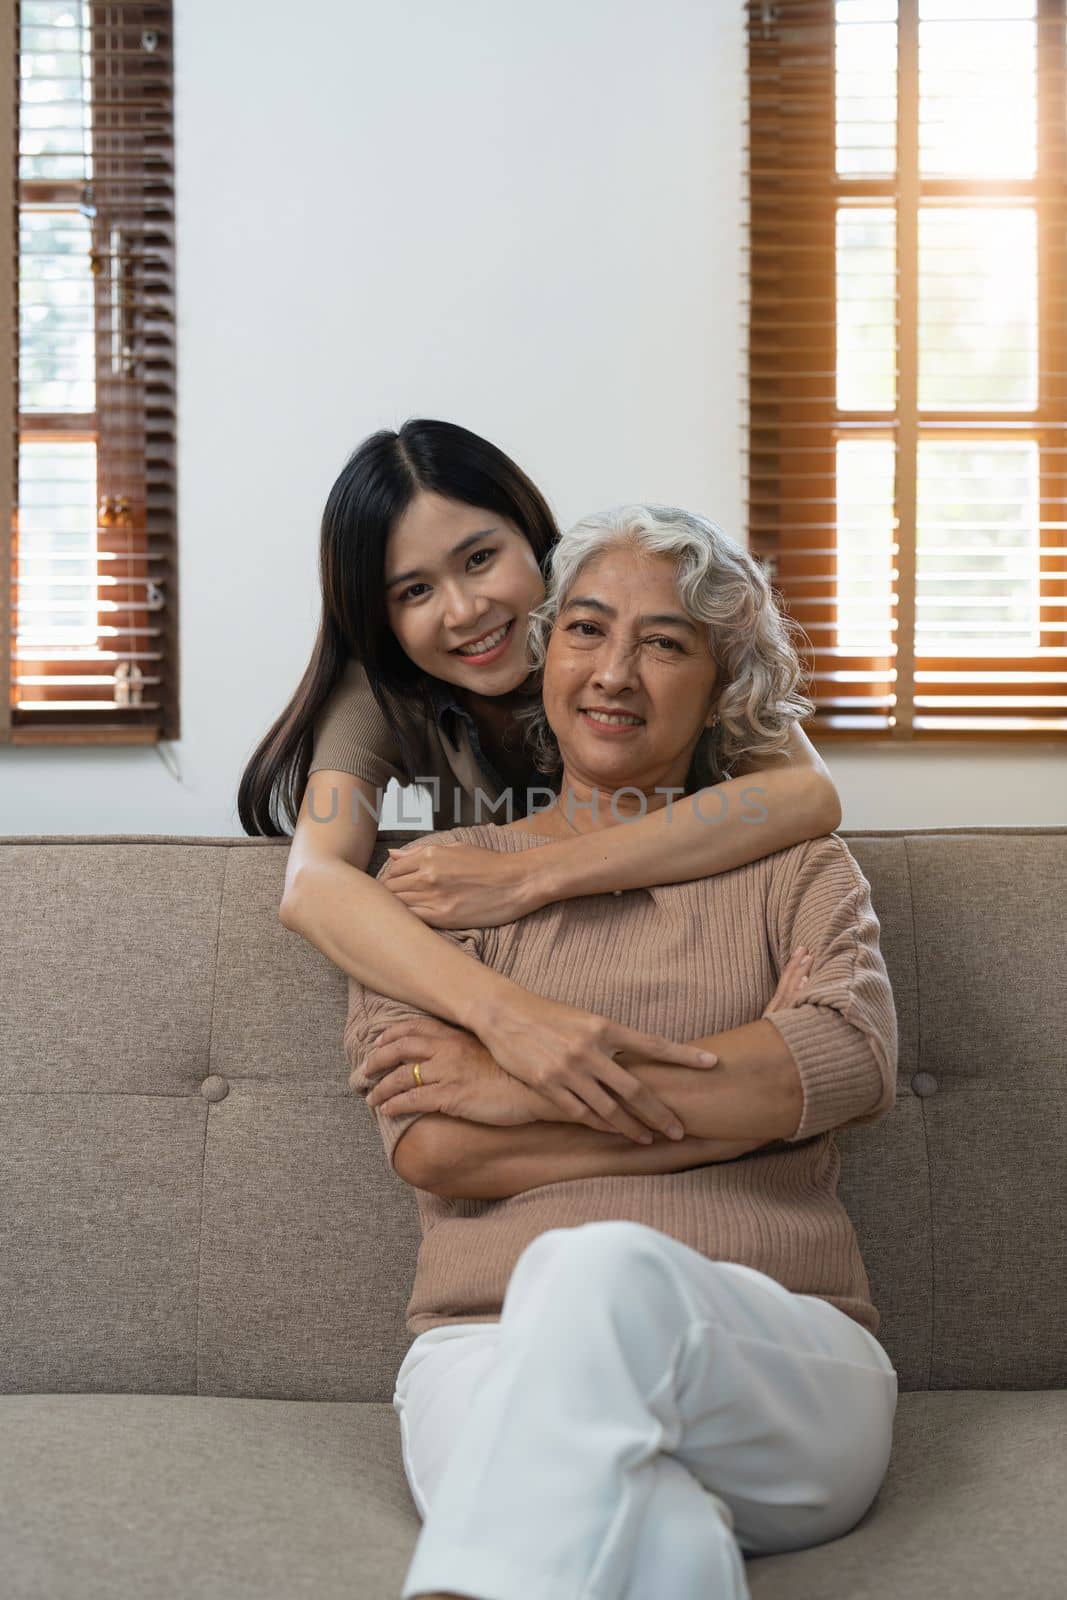 Loving adult daughter hugging older mother on couch at home, family enjoying tender moment together, young woman and mature mum or grandmother looking at each other, two generations.